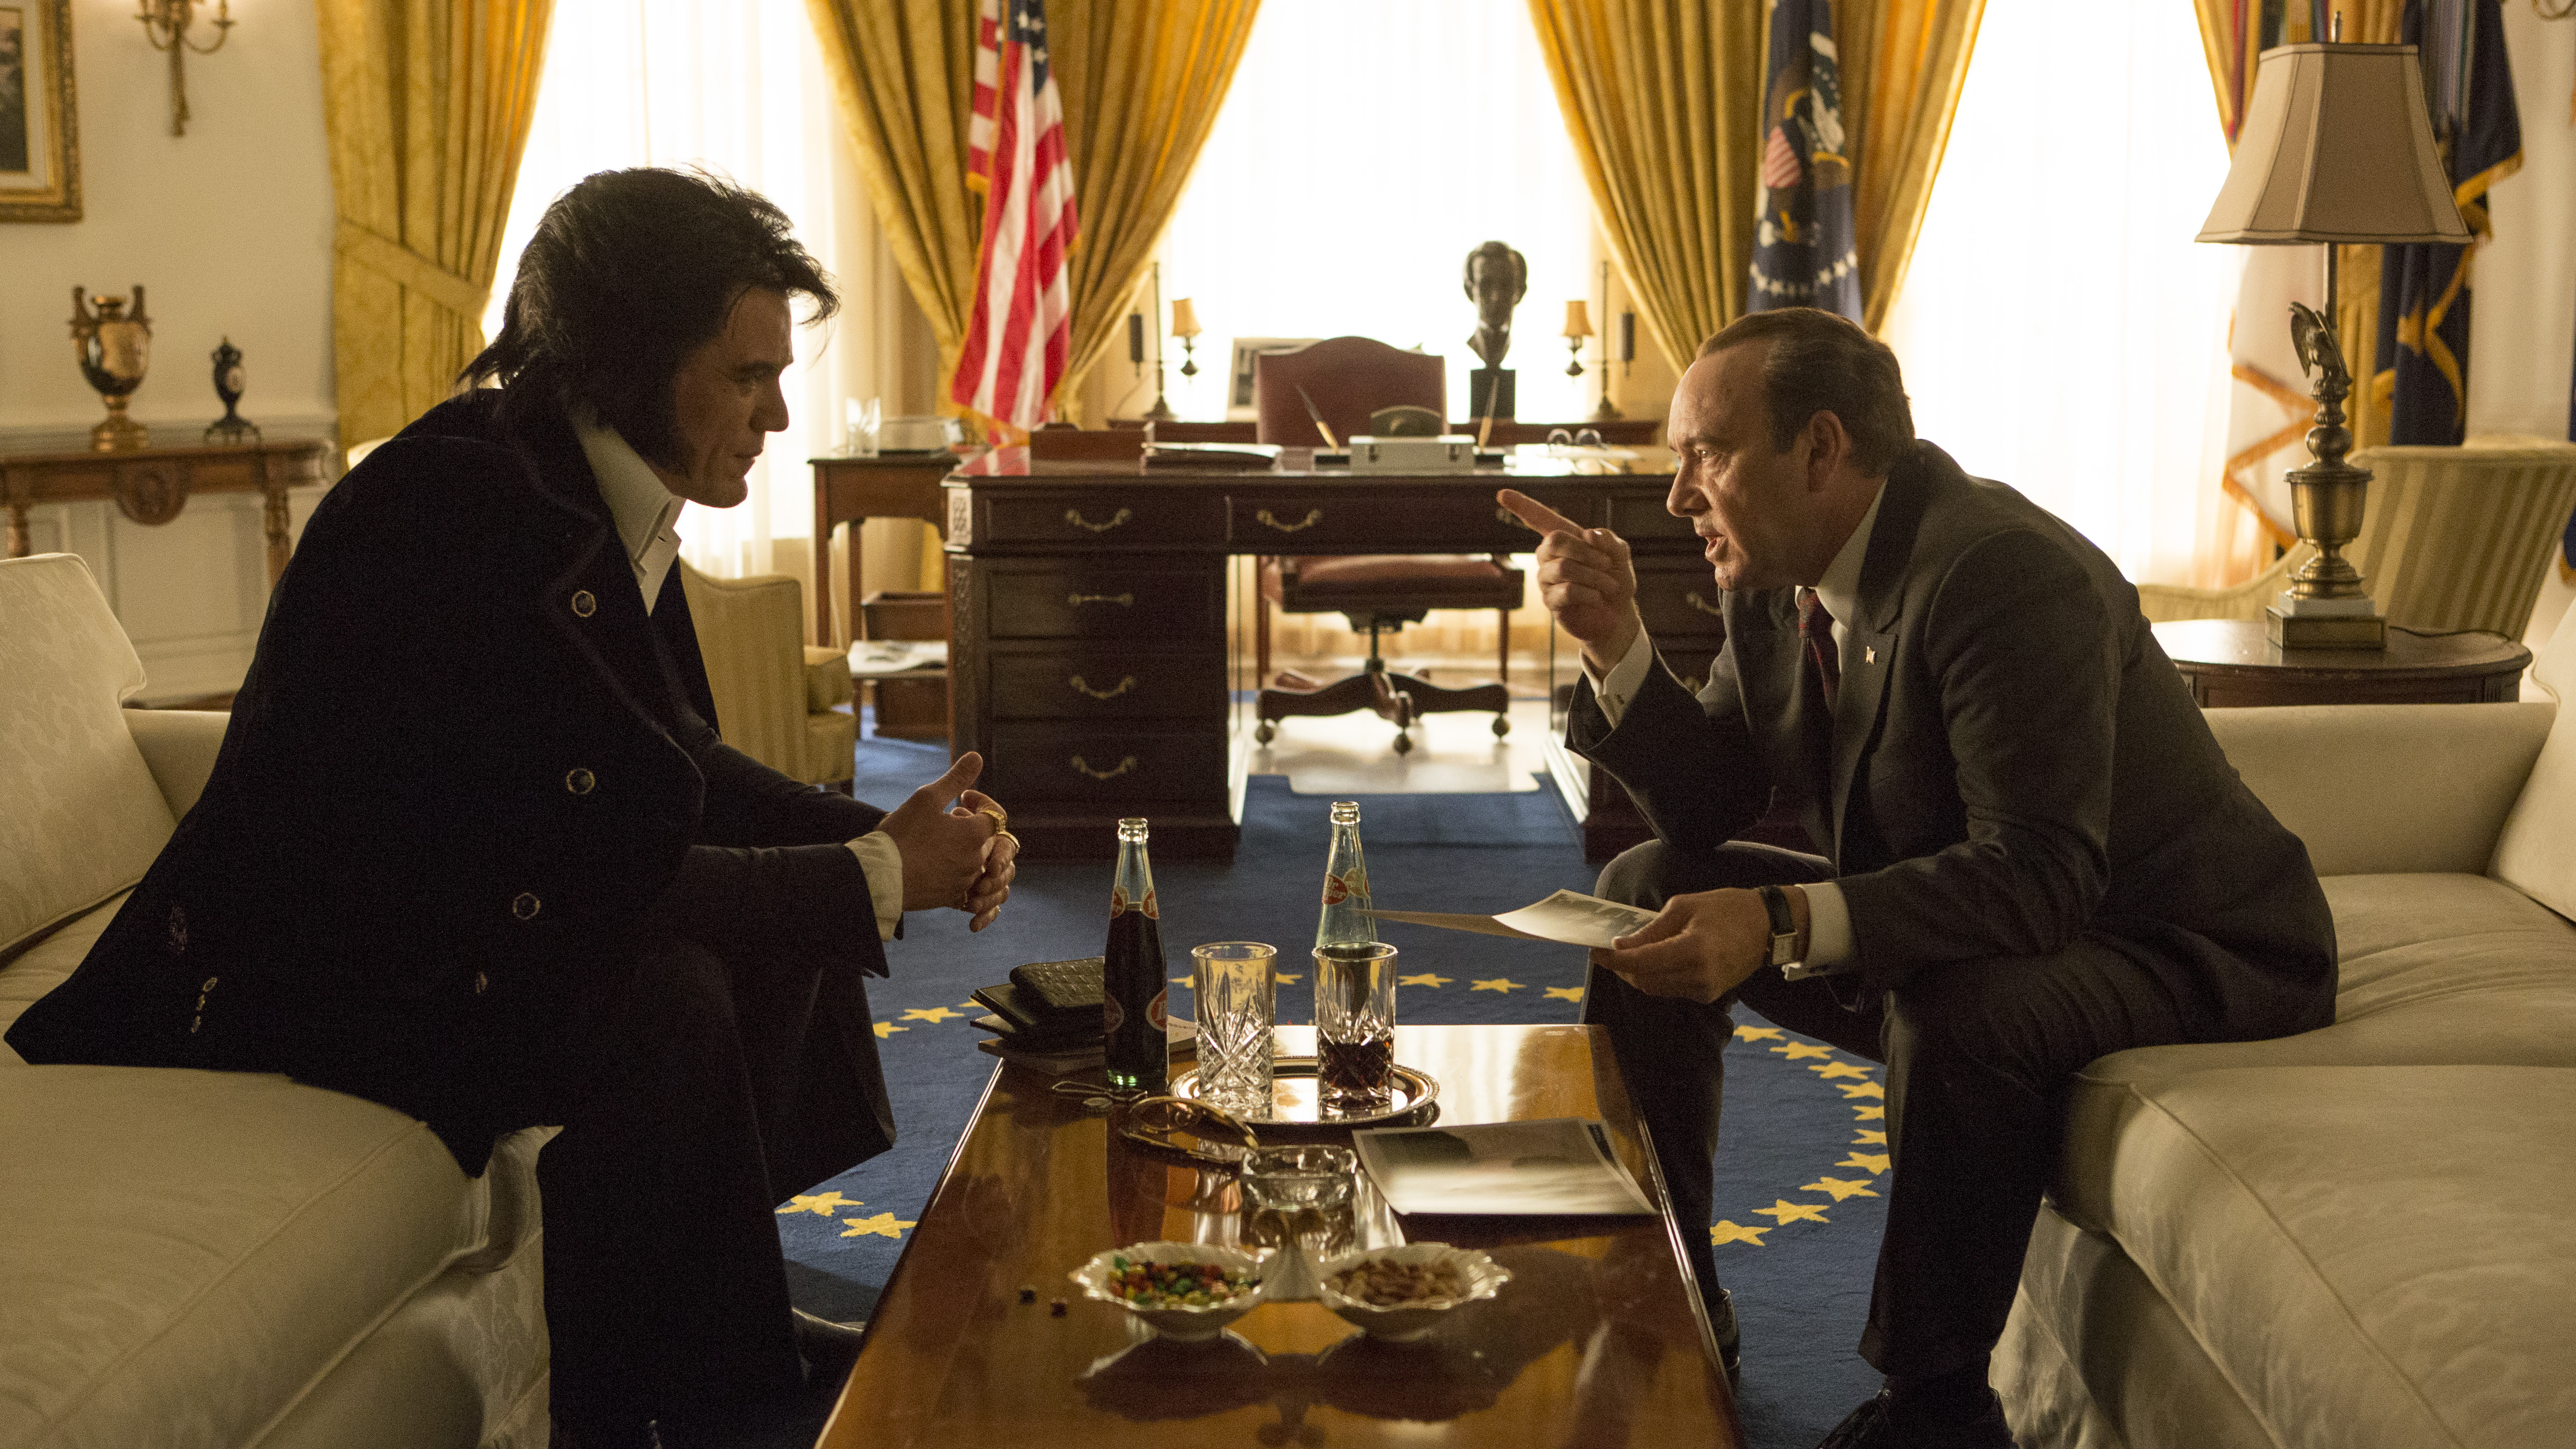 ELVIS & NIXON Is Cute and Amusing, But Could Use More Gravitas